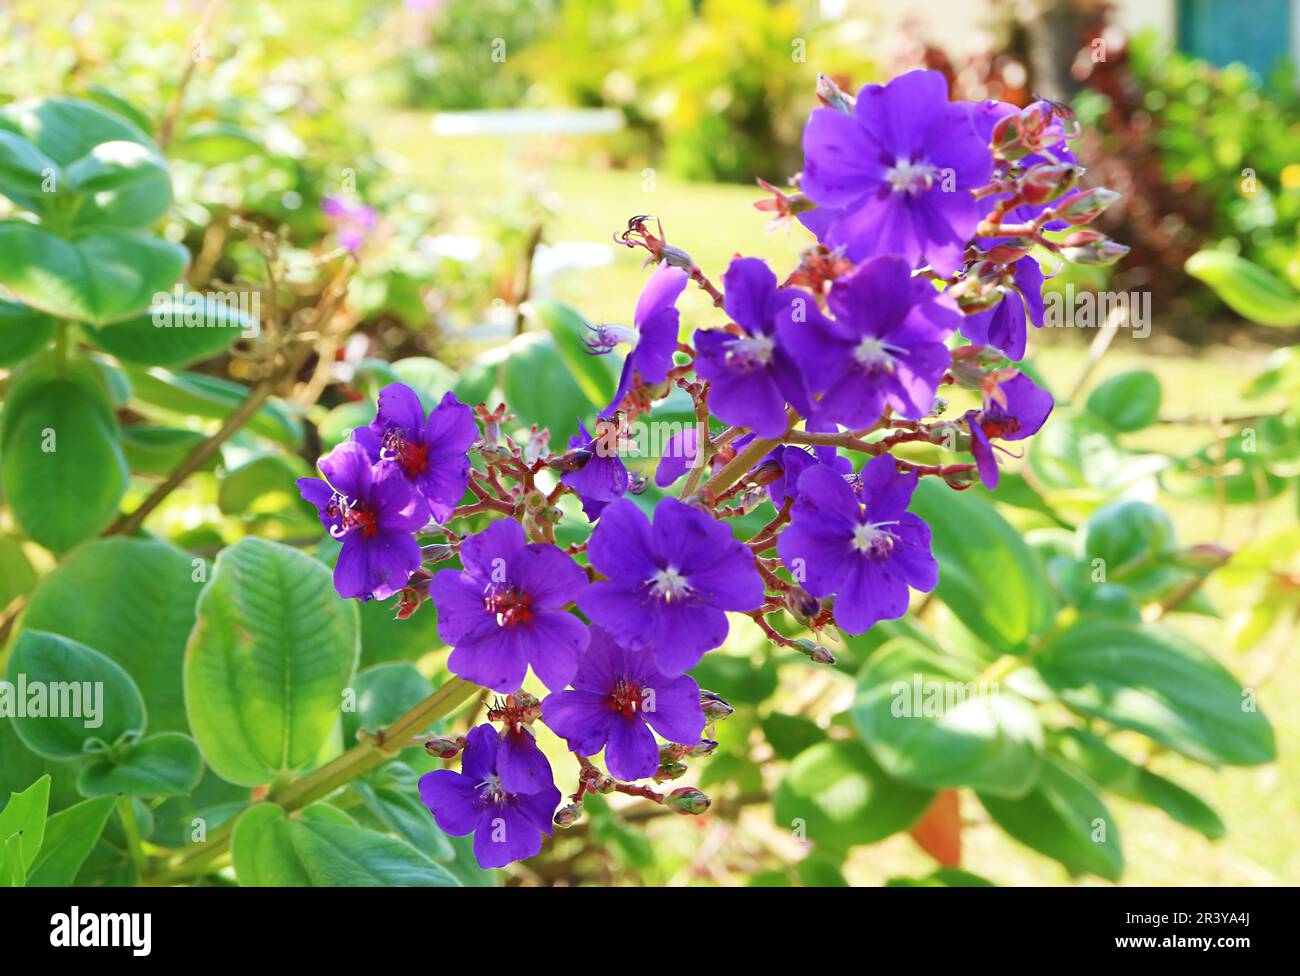 Inflorescence of Stunning Silver Leafed Princess Flowers or Tibouchina Heteromalla on Easter Island of Chile, South America Stock Photo